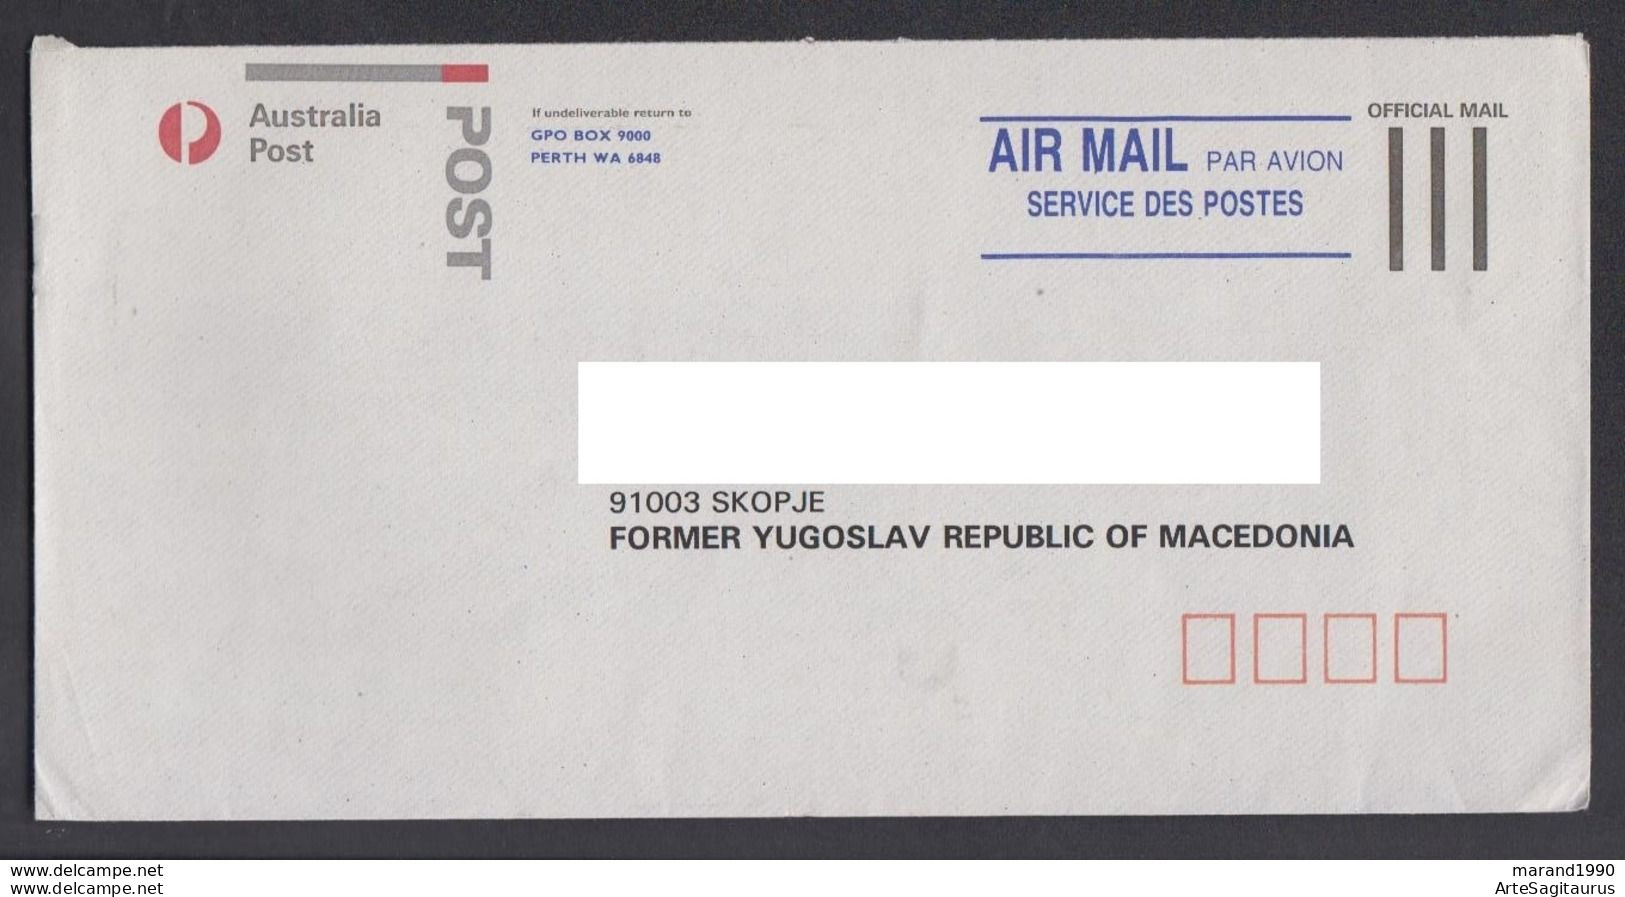 AUSTRALIA AIR MAIL OFFICIAL MAIL MACEDONIA  (007) - Officials